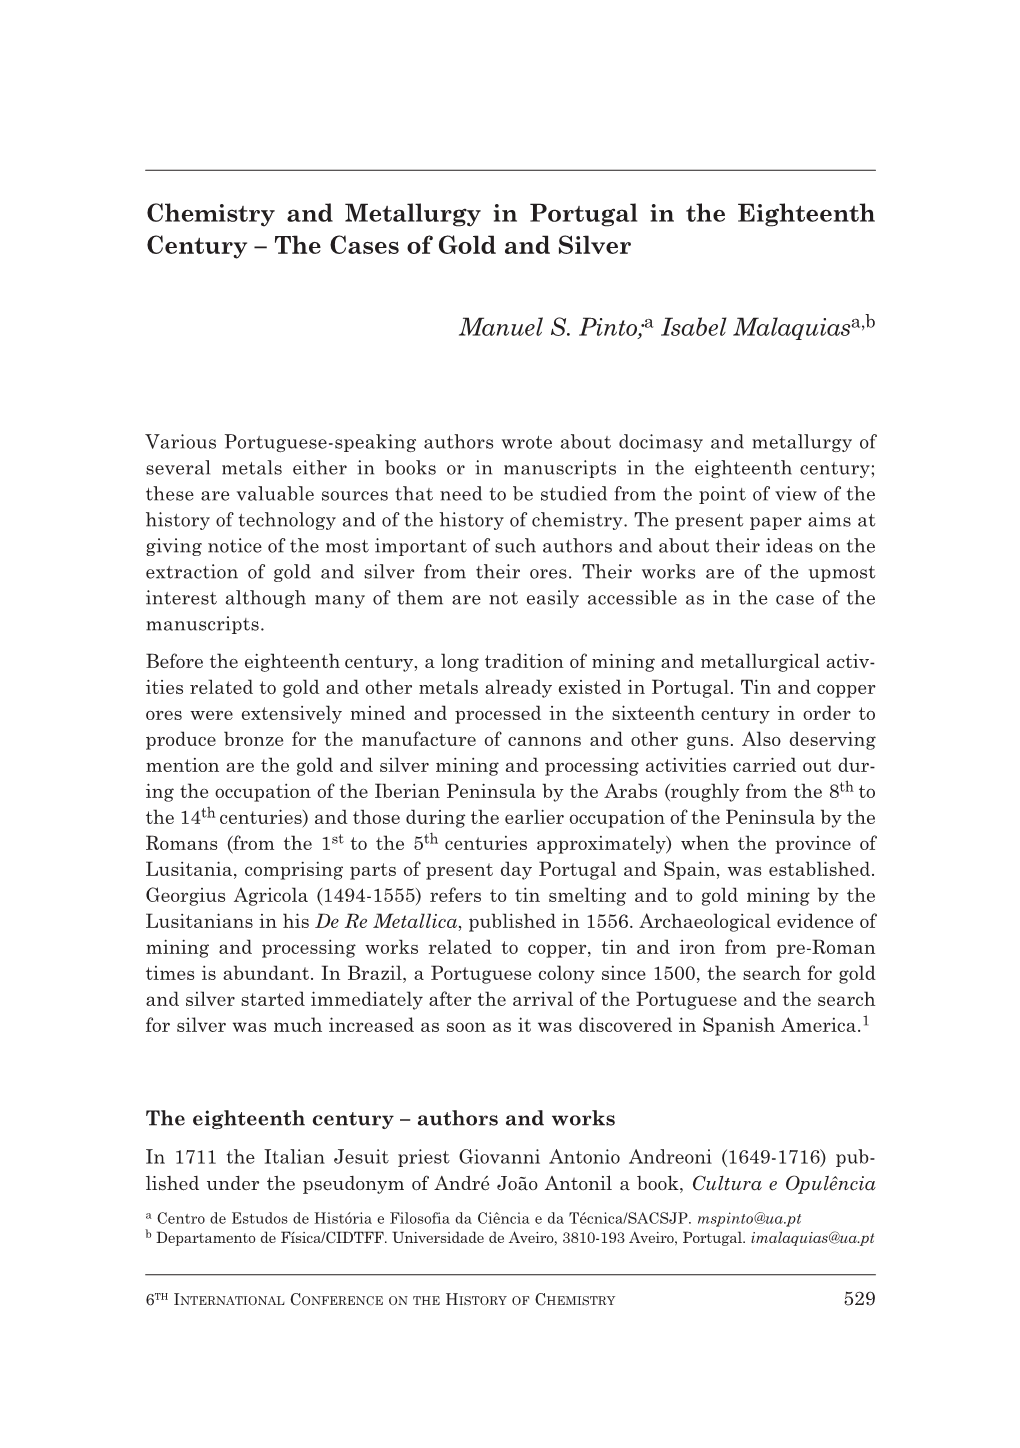 Chemistry and Metallurgy in Portugal in the Eighteenth Century – the Cases of Gold and Silver